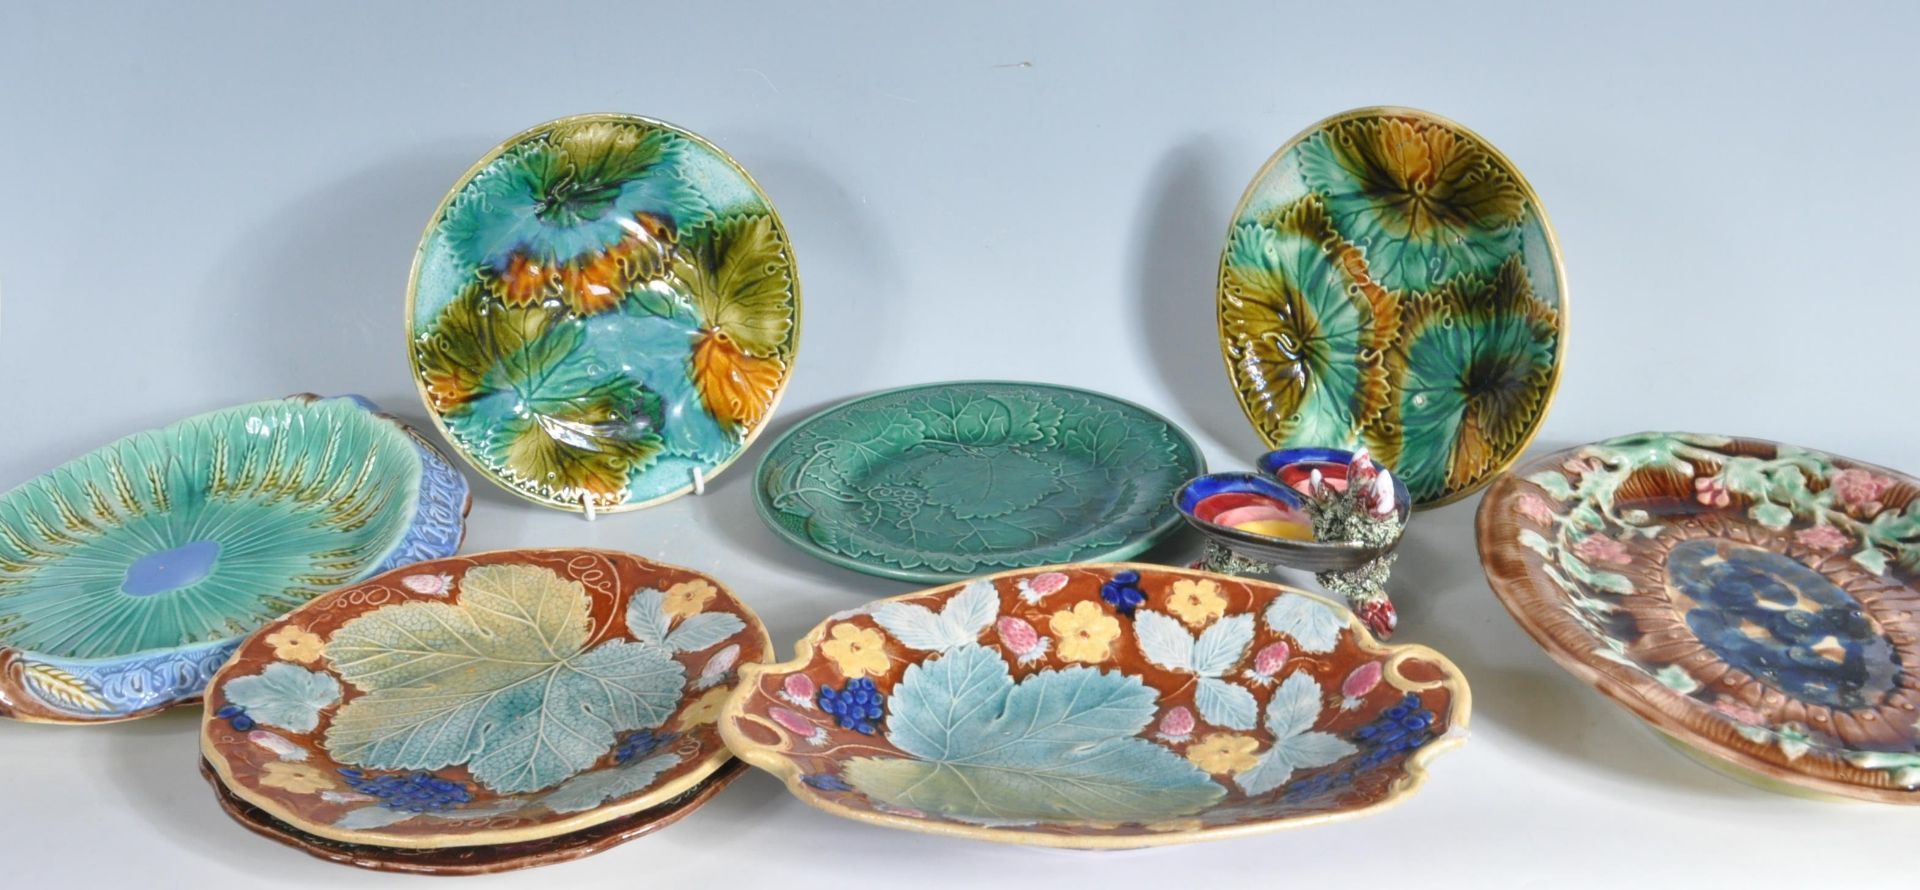 COLLECTION OF VICTORIAN ENGLISH MAJOLICA PLATESA ND DISHES.